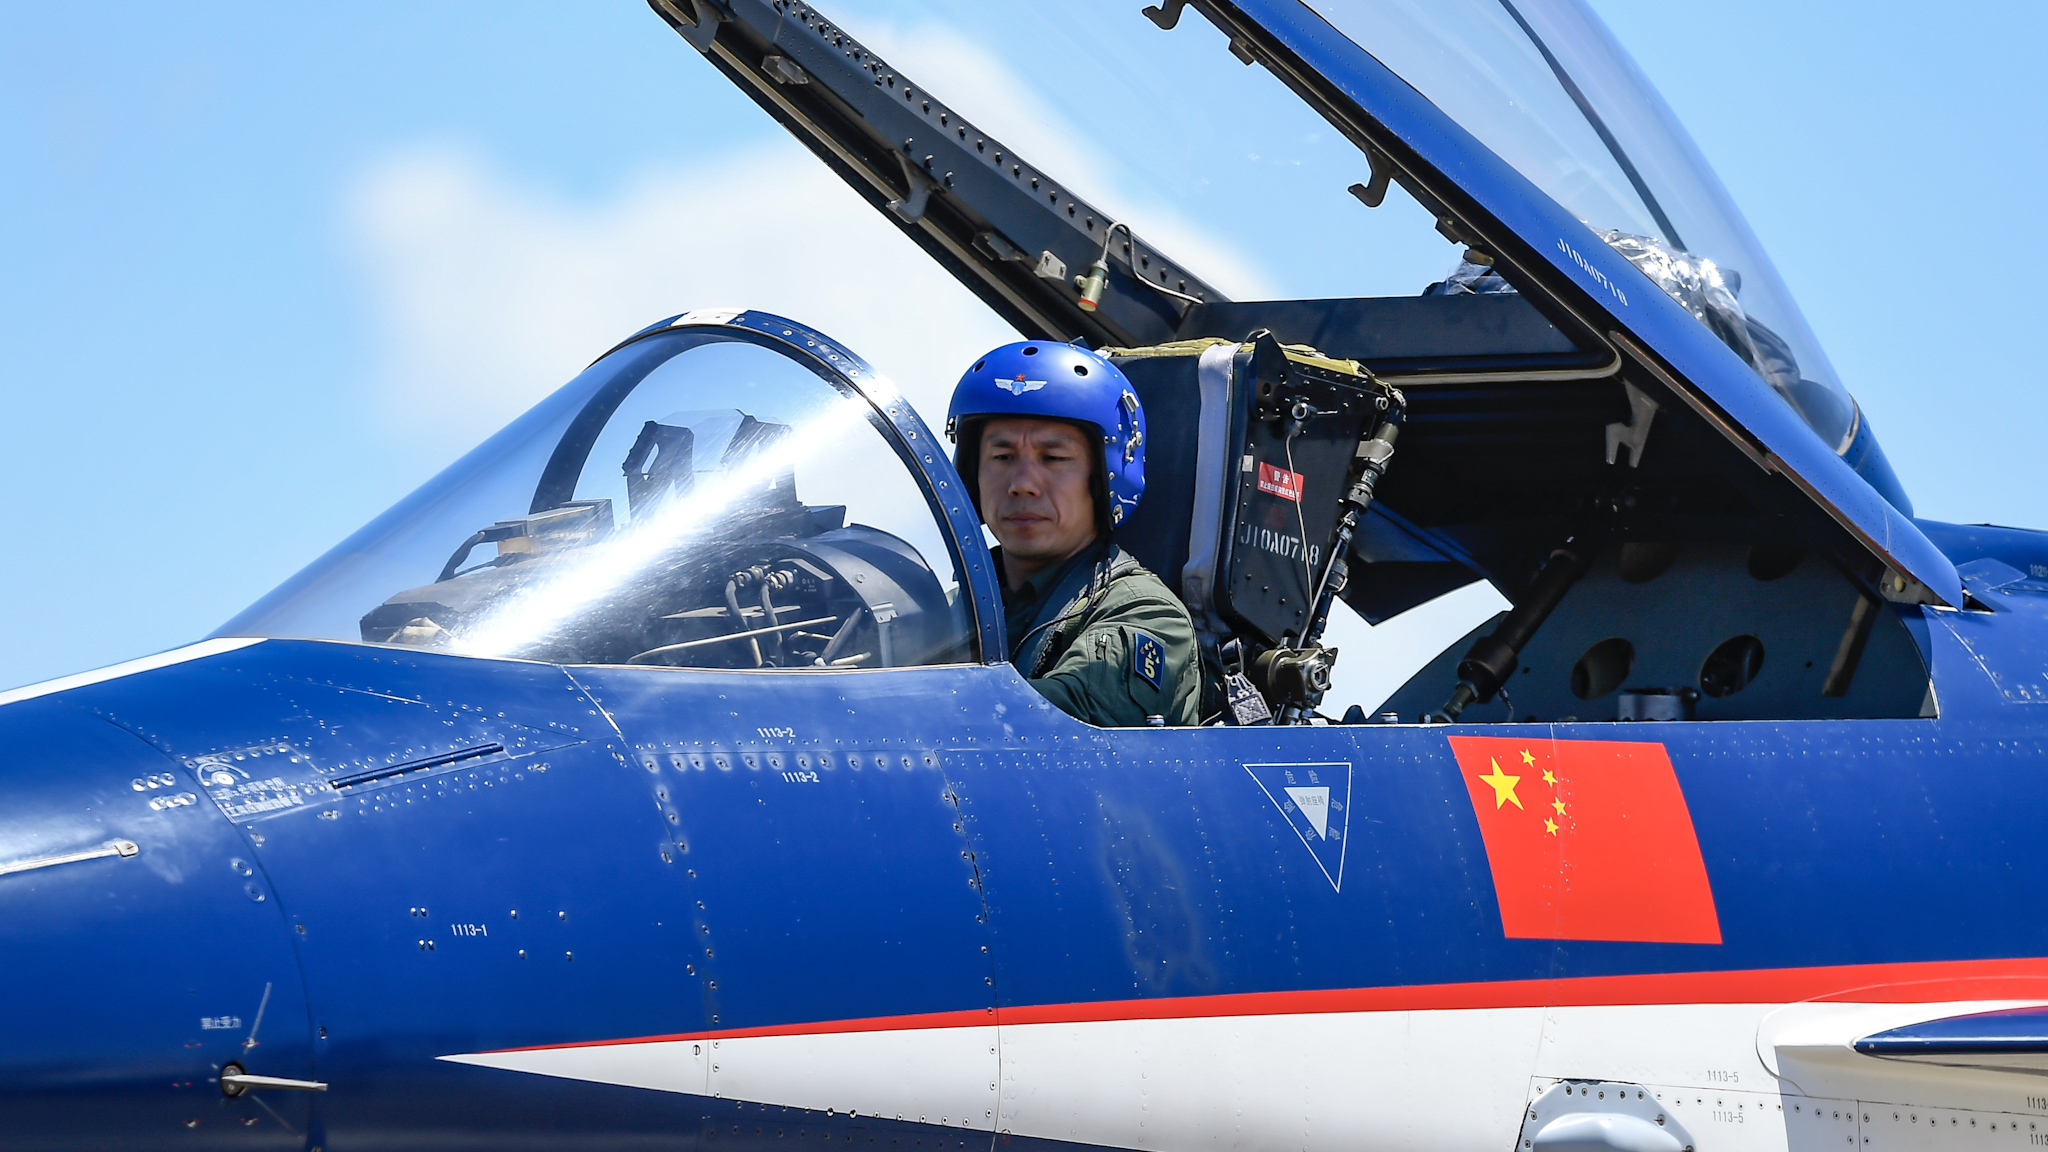 ZHUHAI, CHINA - SEPTEMBER 22: Fighter jet of the Bayi Aerobatics Team of the Chinese People's Liberation Army (PLA) Air Force arrives at Zhuhai International Airshow Center before the upcoming Airshow China 2021 on September 22, 2021 in Zhuhai, Guangdong Province of China.